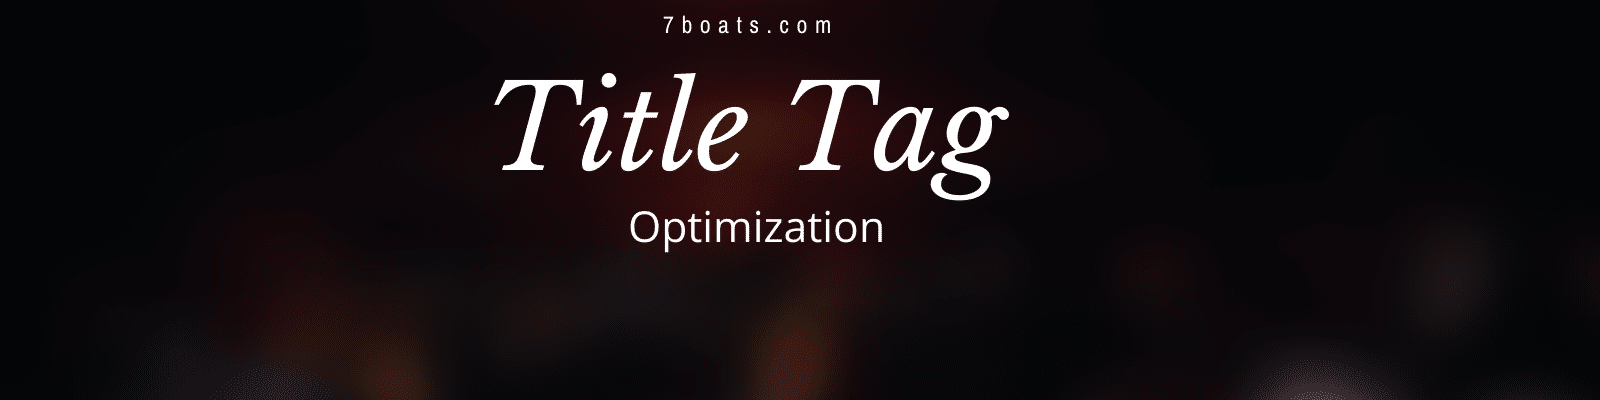 Golden Rules of Writing Powerful SEO Title Tags – Guide to SEO Title Tags – Title Tag Tips